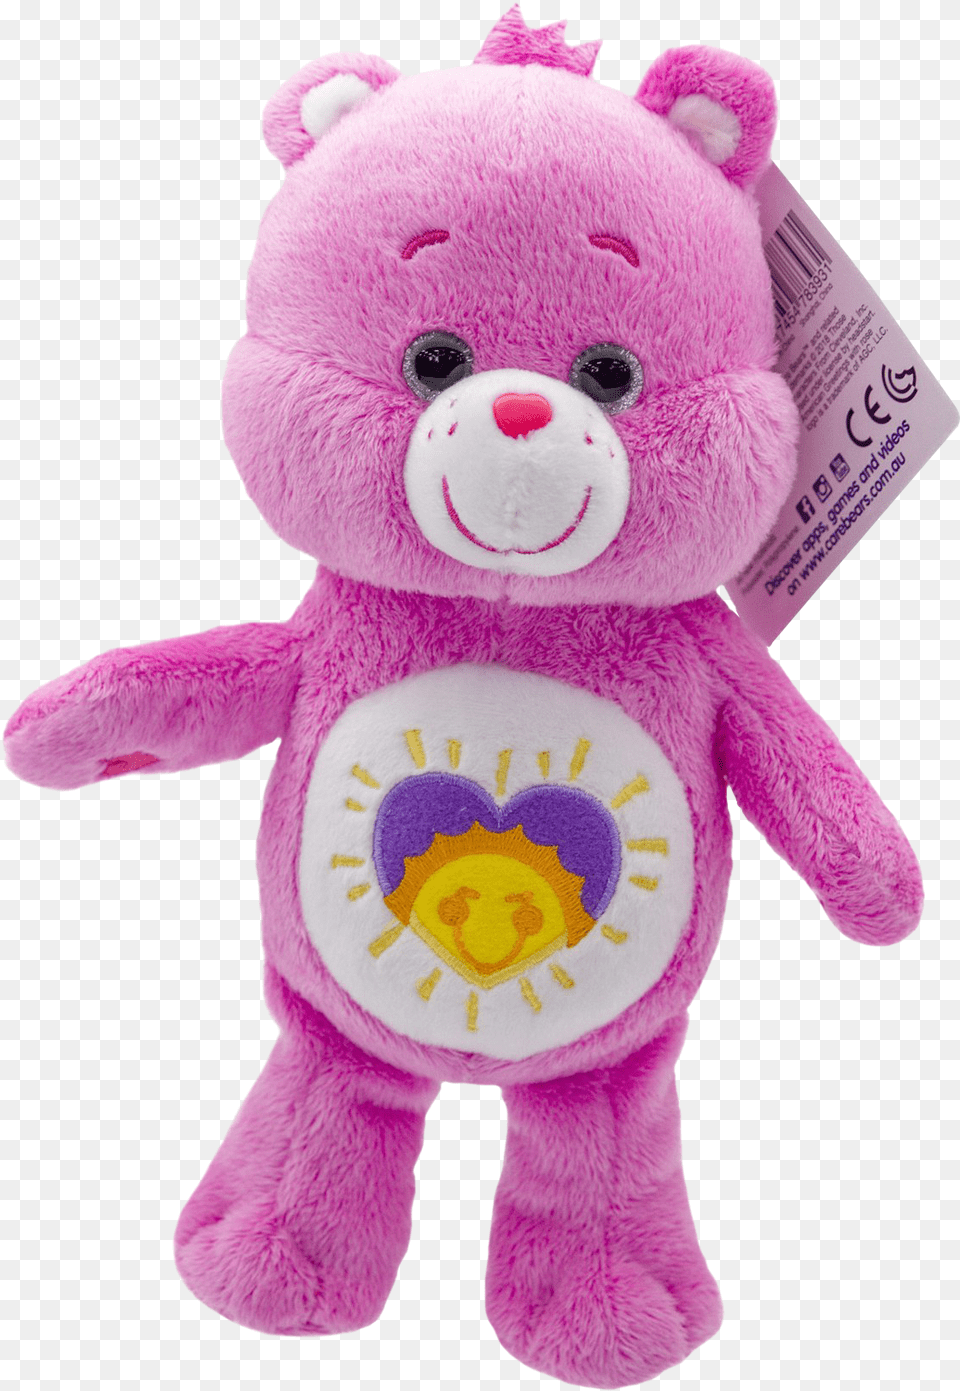 Plush, Toy, Teddy Bear Png Image